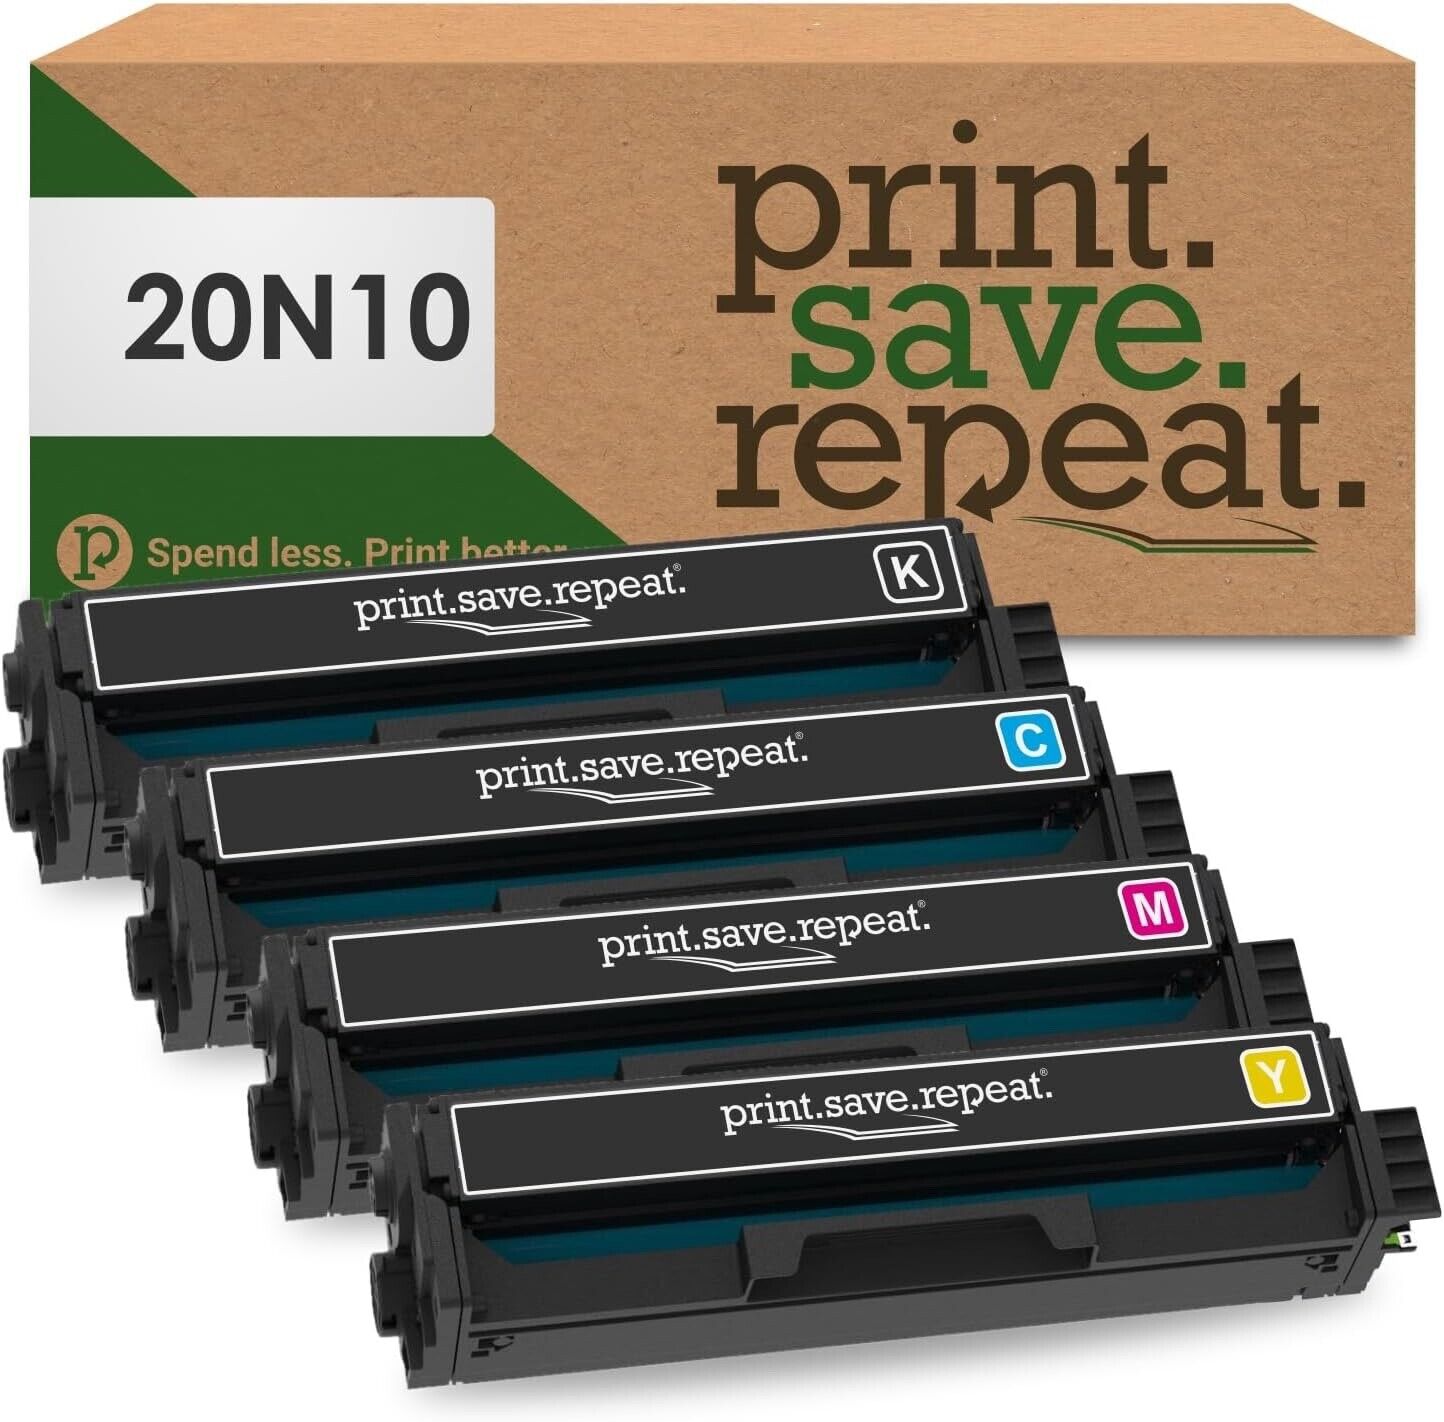 Print.Save.Repeat. Lexmark 20N10 4-Color Combo Pack Compatable Toner for CS331